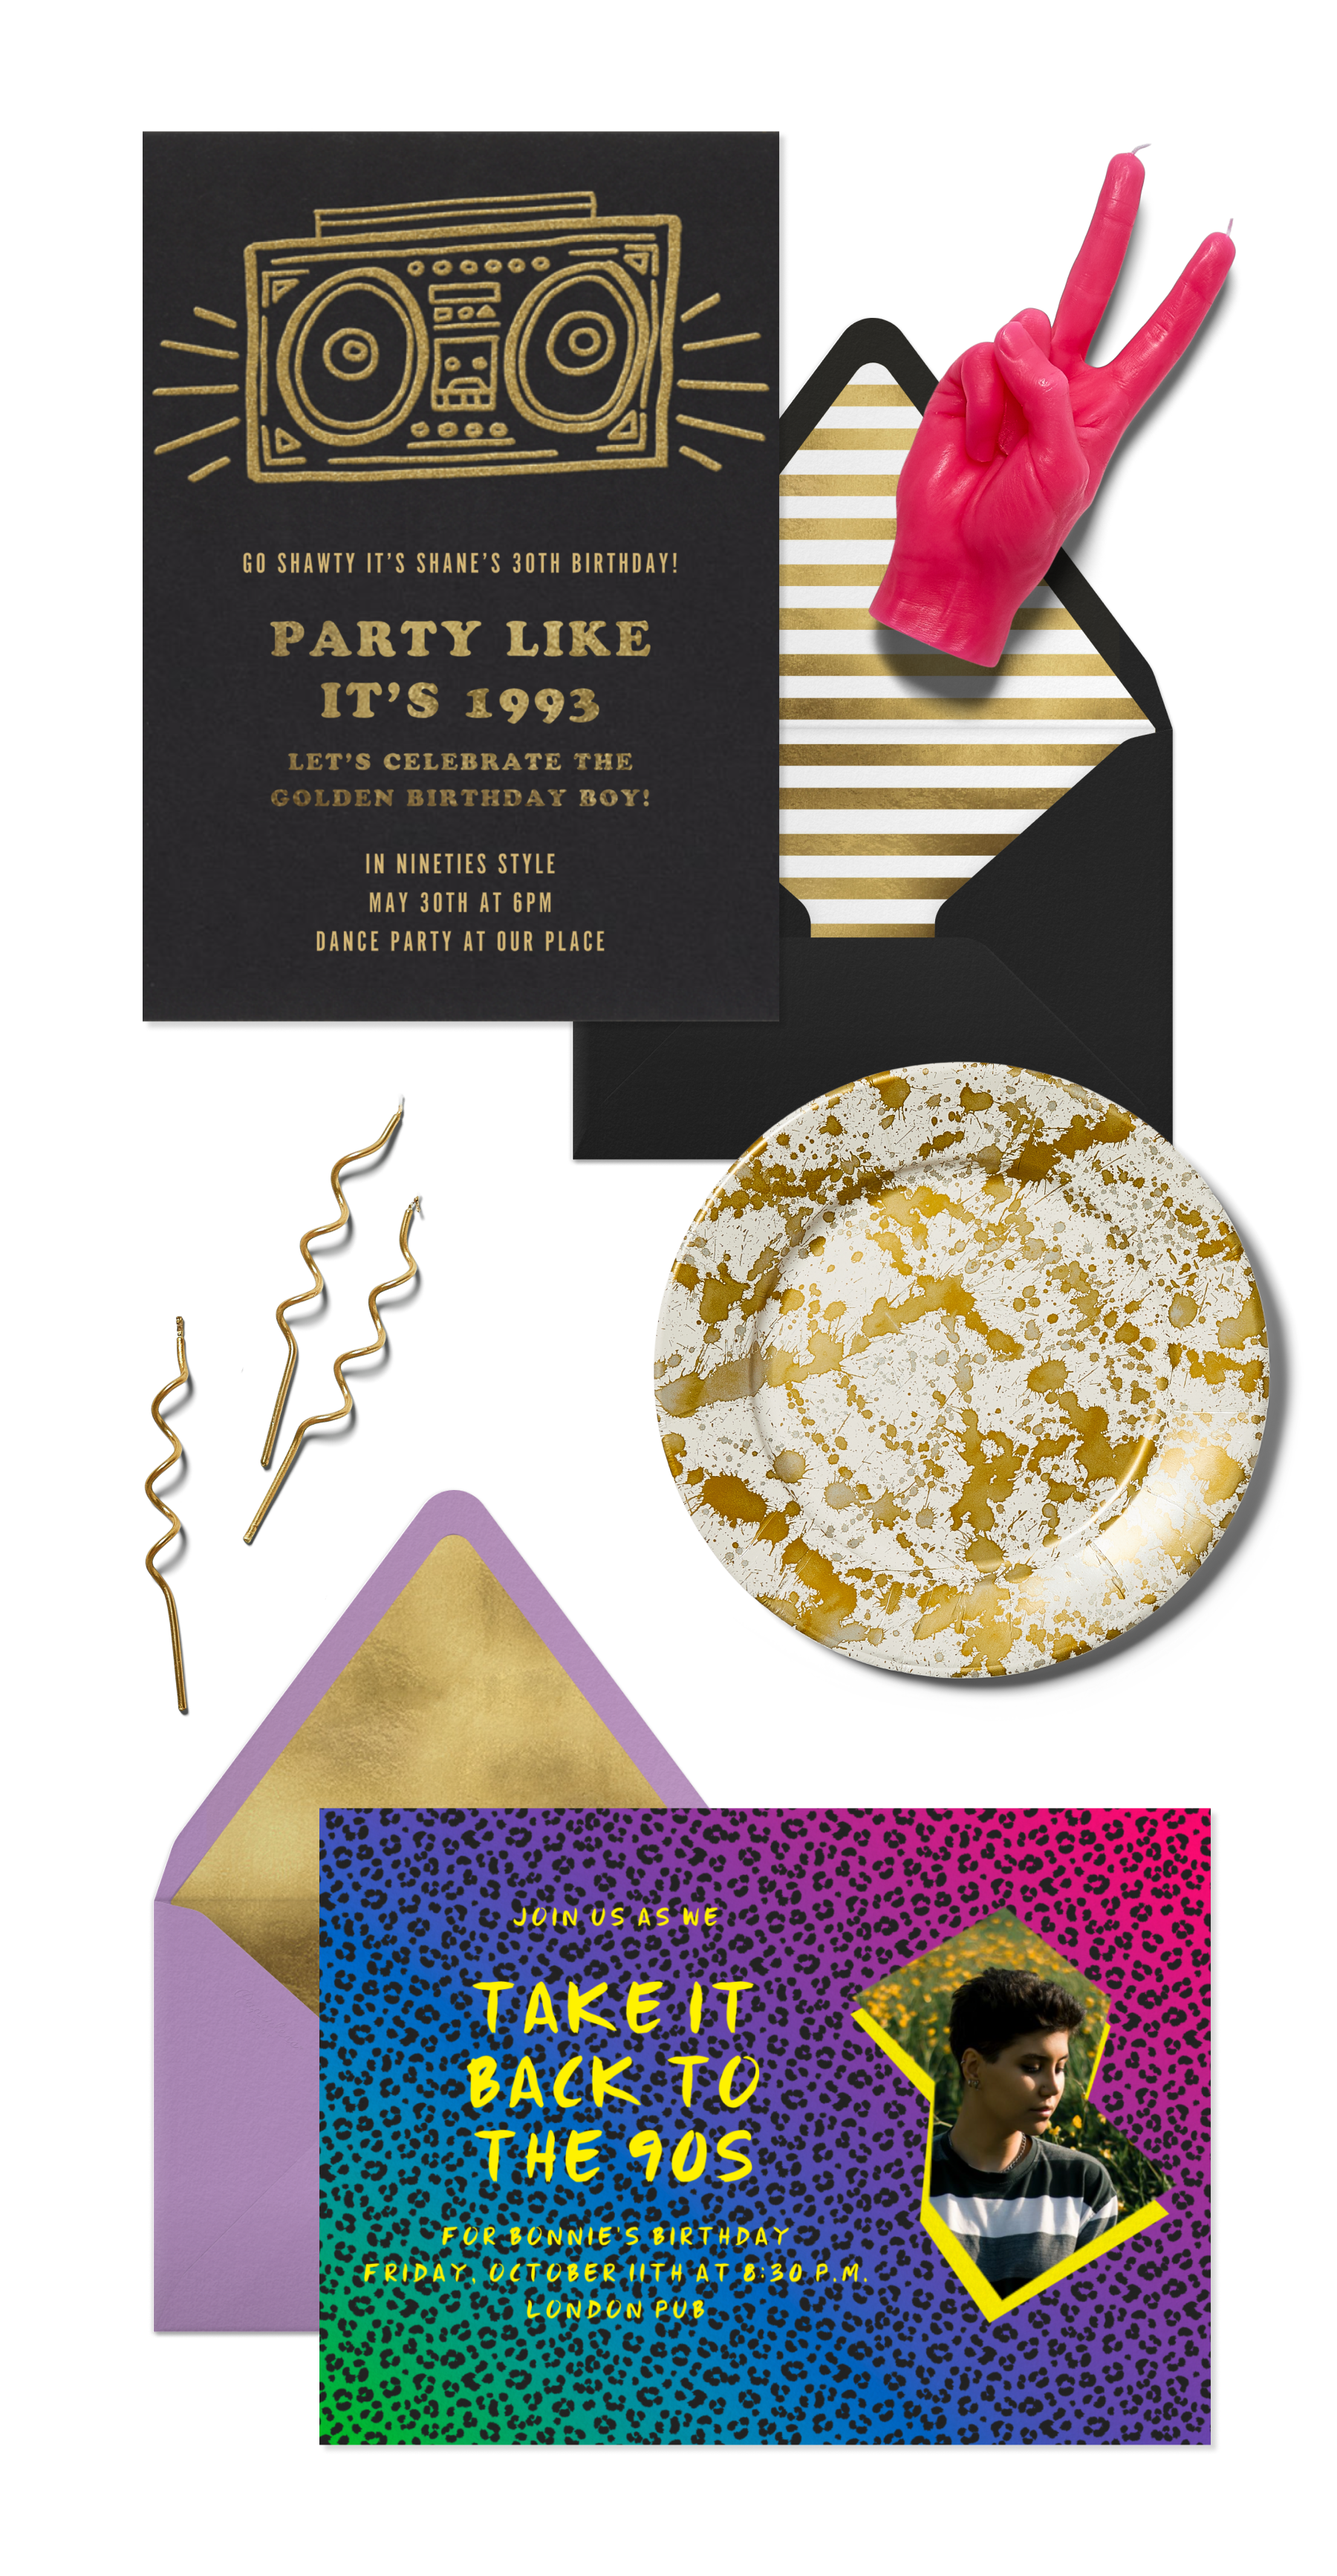 A gold starburst invitation; silver foil star and moon balloons; gold star plate and cake toppers; tassels, crystals and tarot cards.